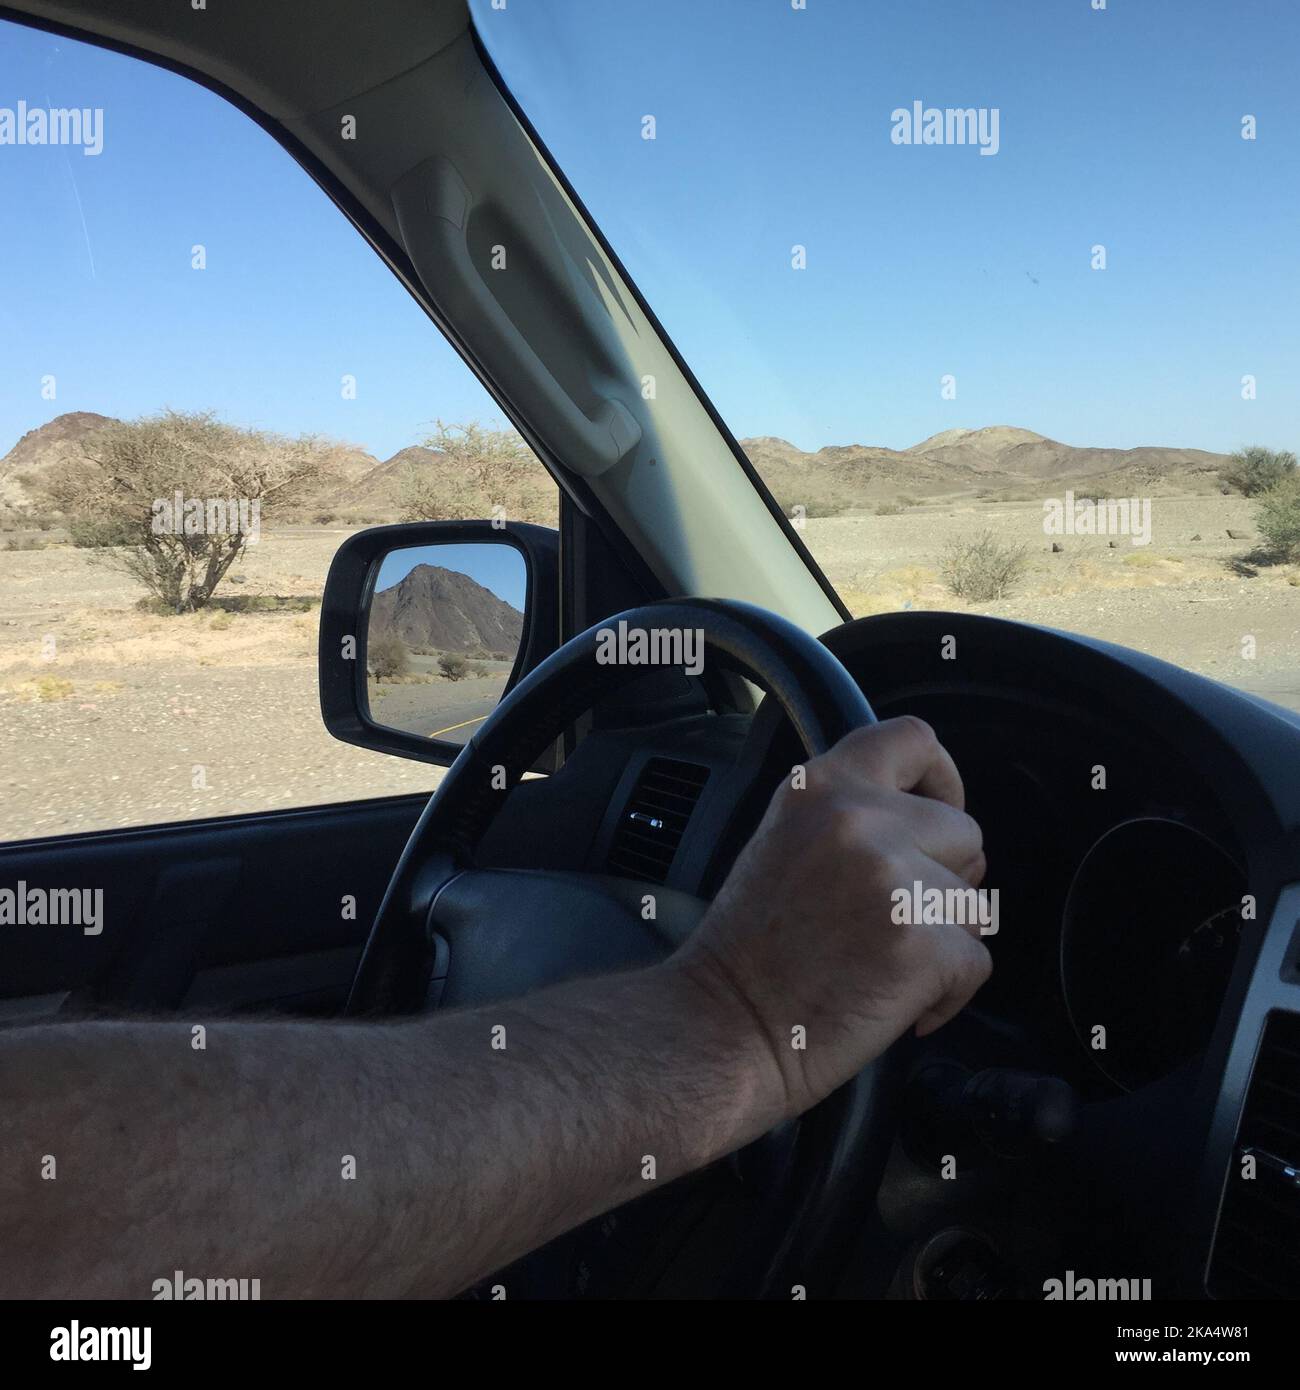 Close-up of a man's hand on a steering wheel driving in desert landscape, Oman Stock Photo